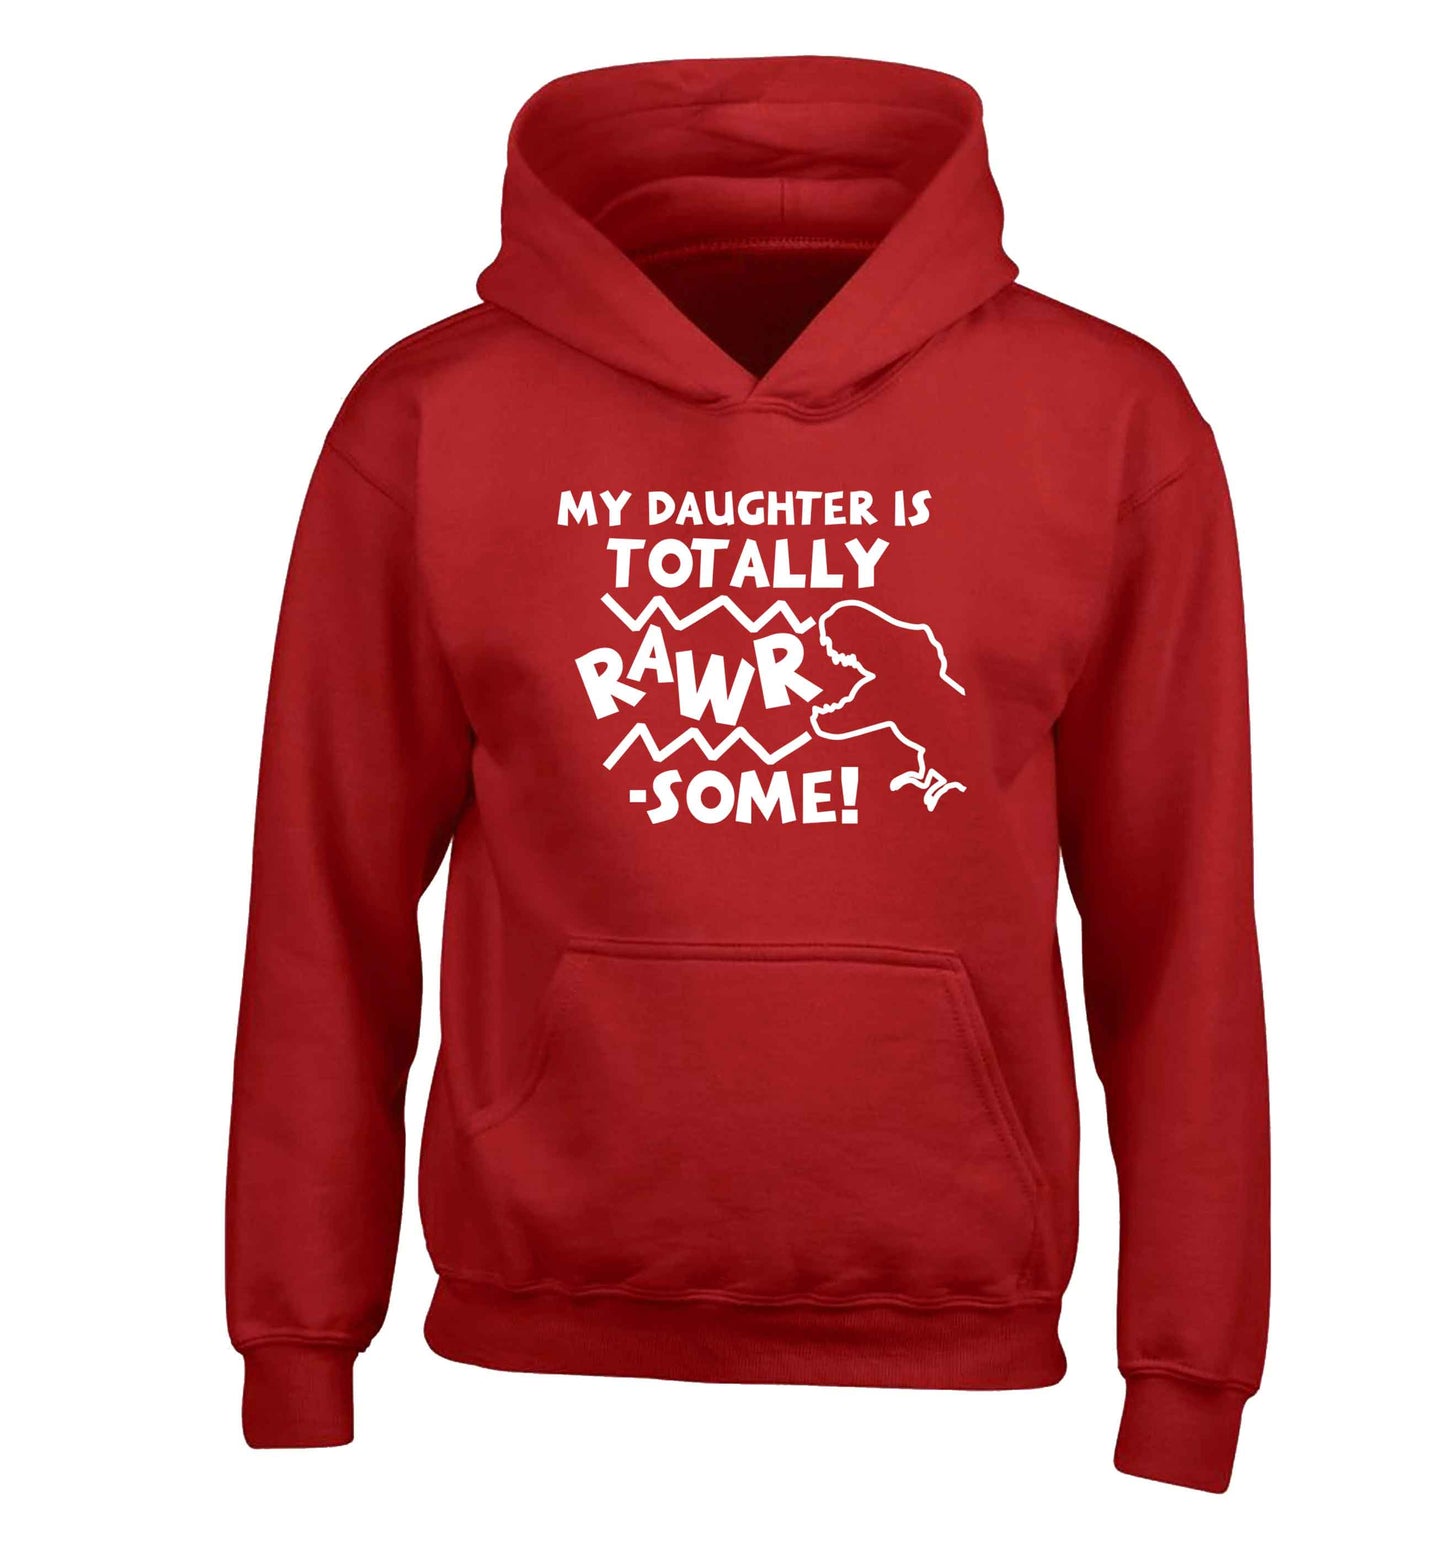 My daughter is totally rawrsome children's red hoodie 12-13 Years